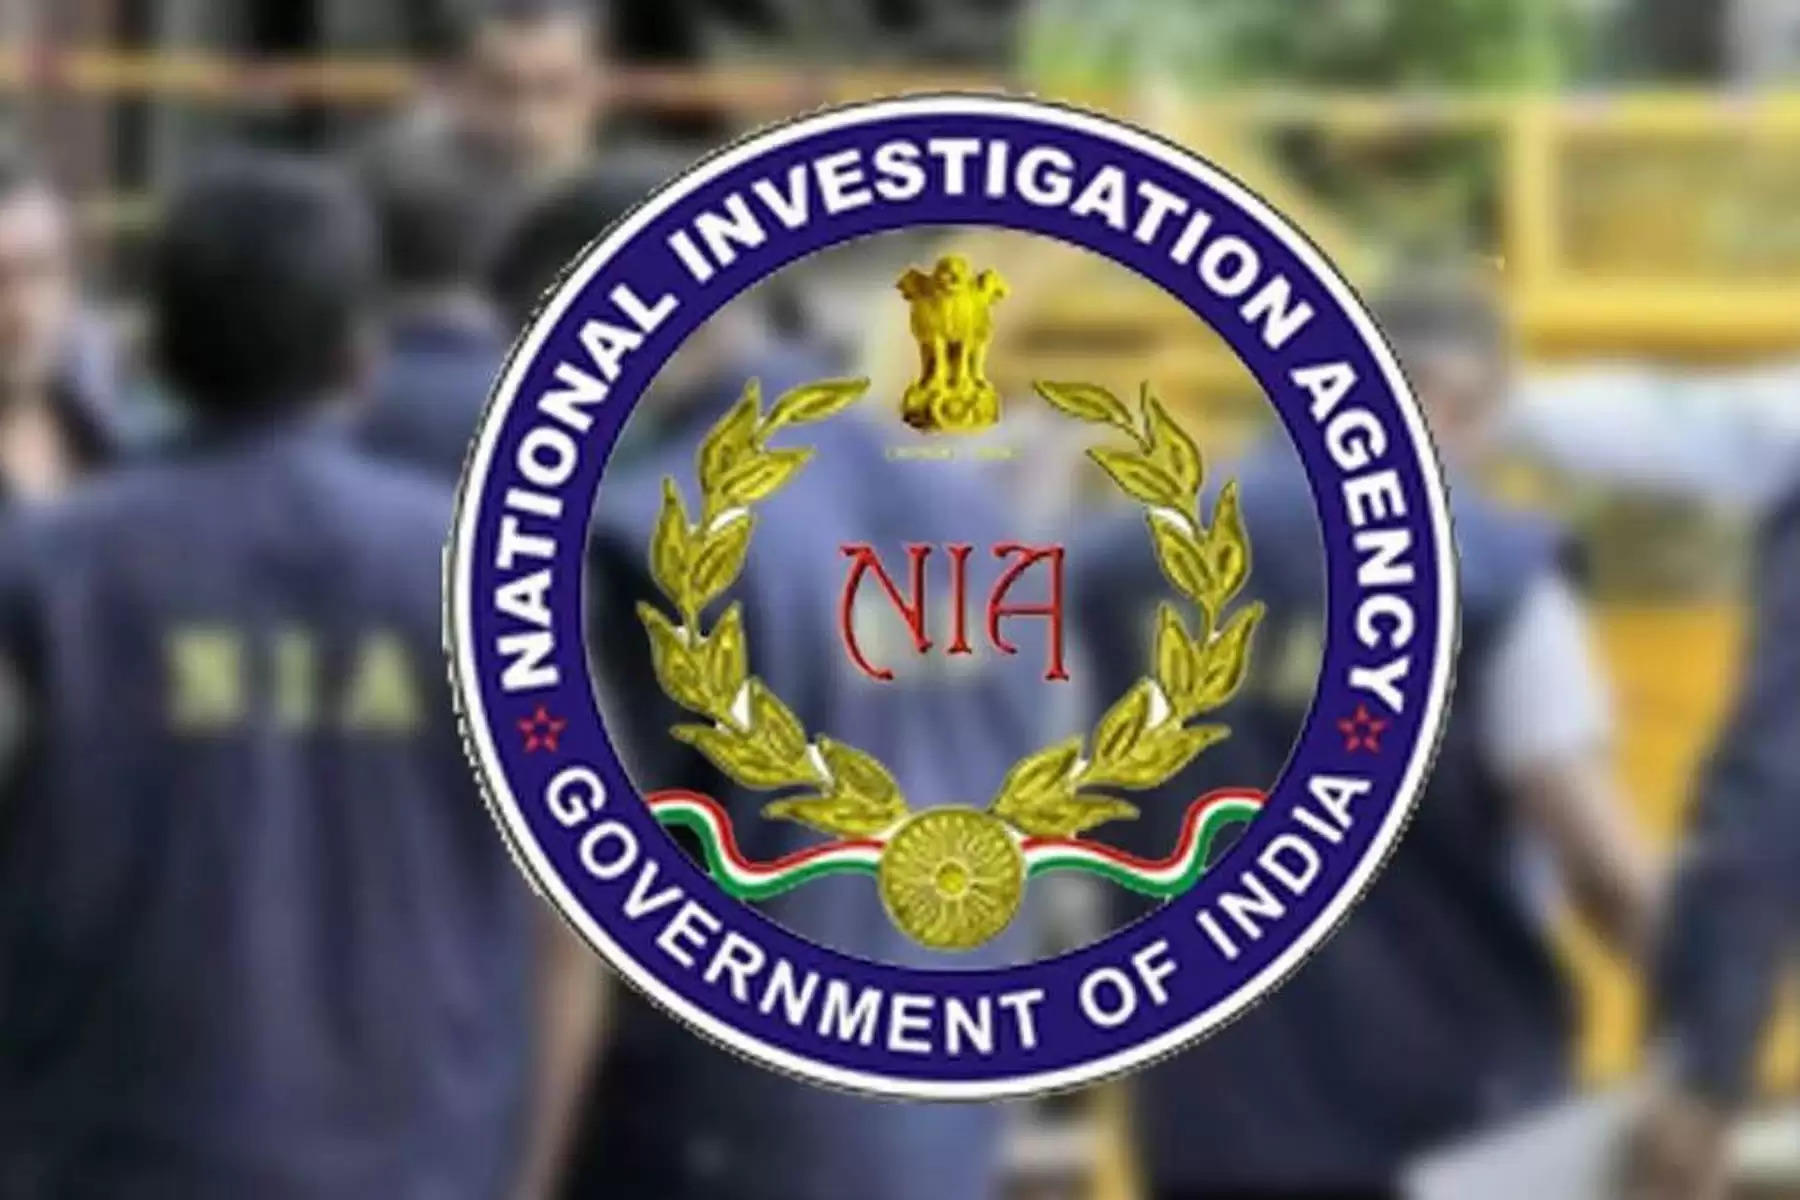 National Investigation Agency (NIA) has named three arrested persons-- Mohd Zahed, Maaz Hasan Farooq, and Samiuddin-- under the Unlawful Activities Prevention Act (UAPA) for conspiring terror attacks in Hyderabad last October. 